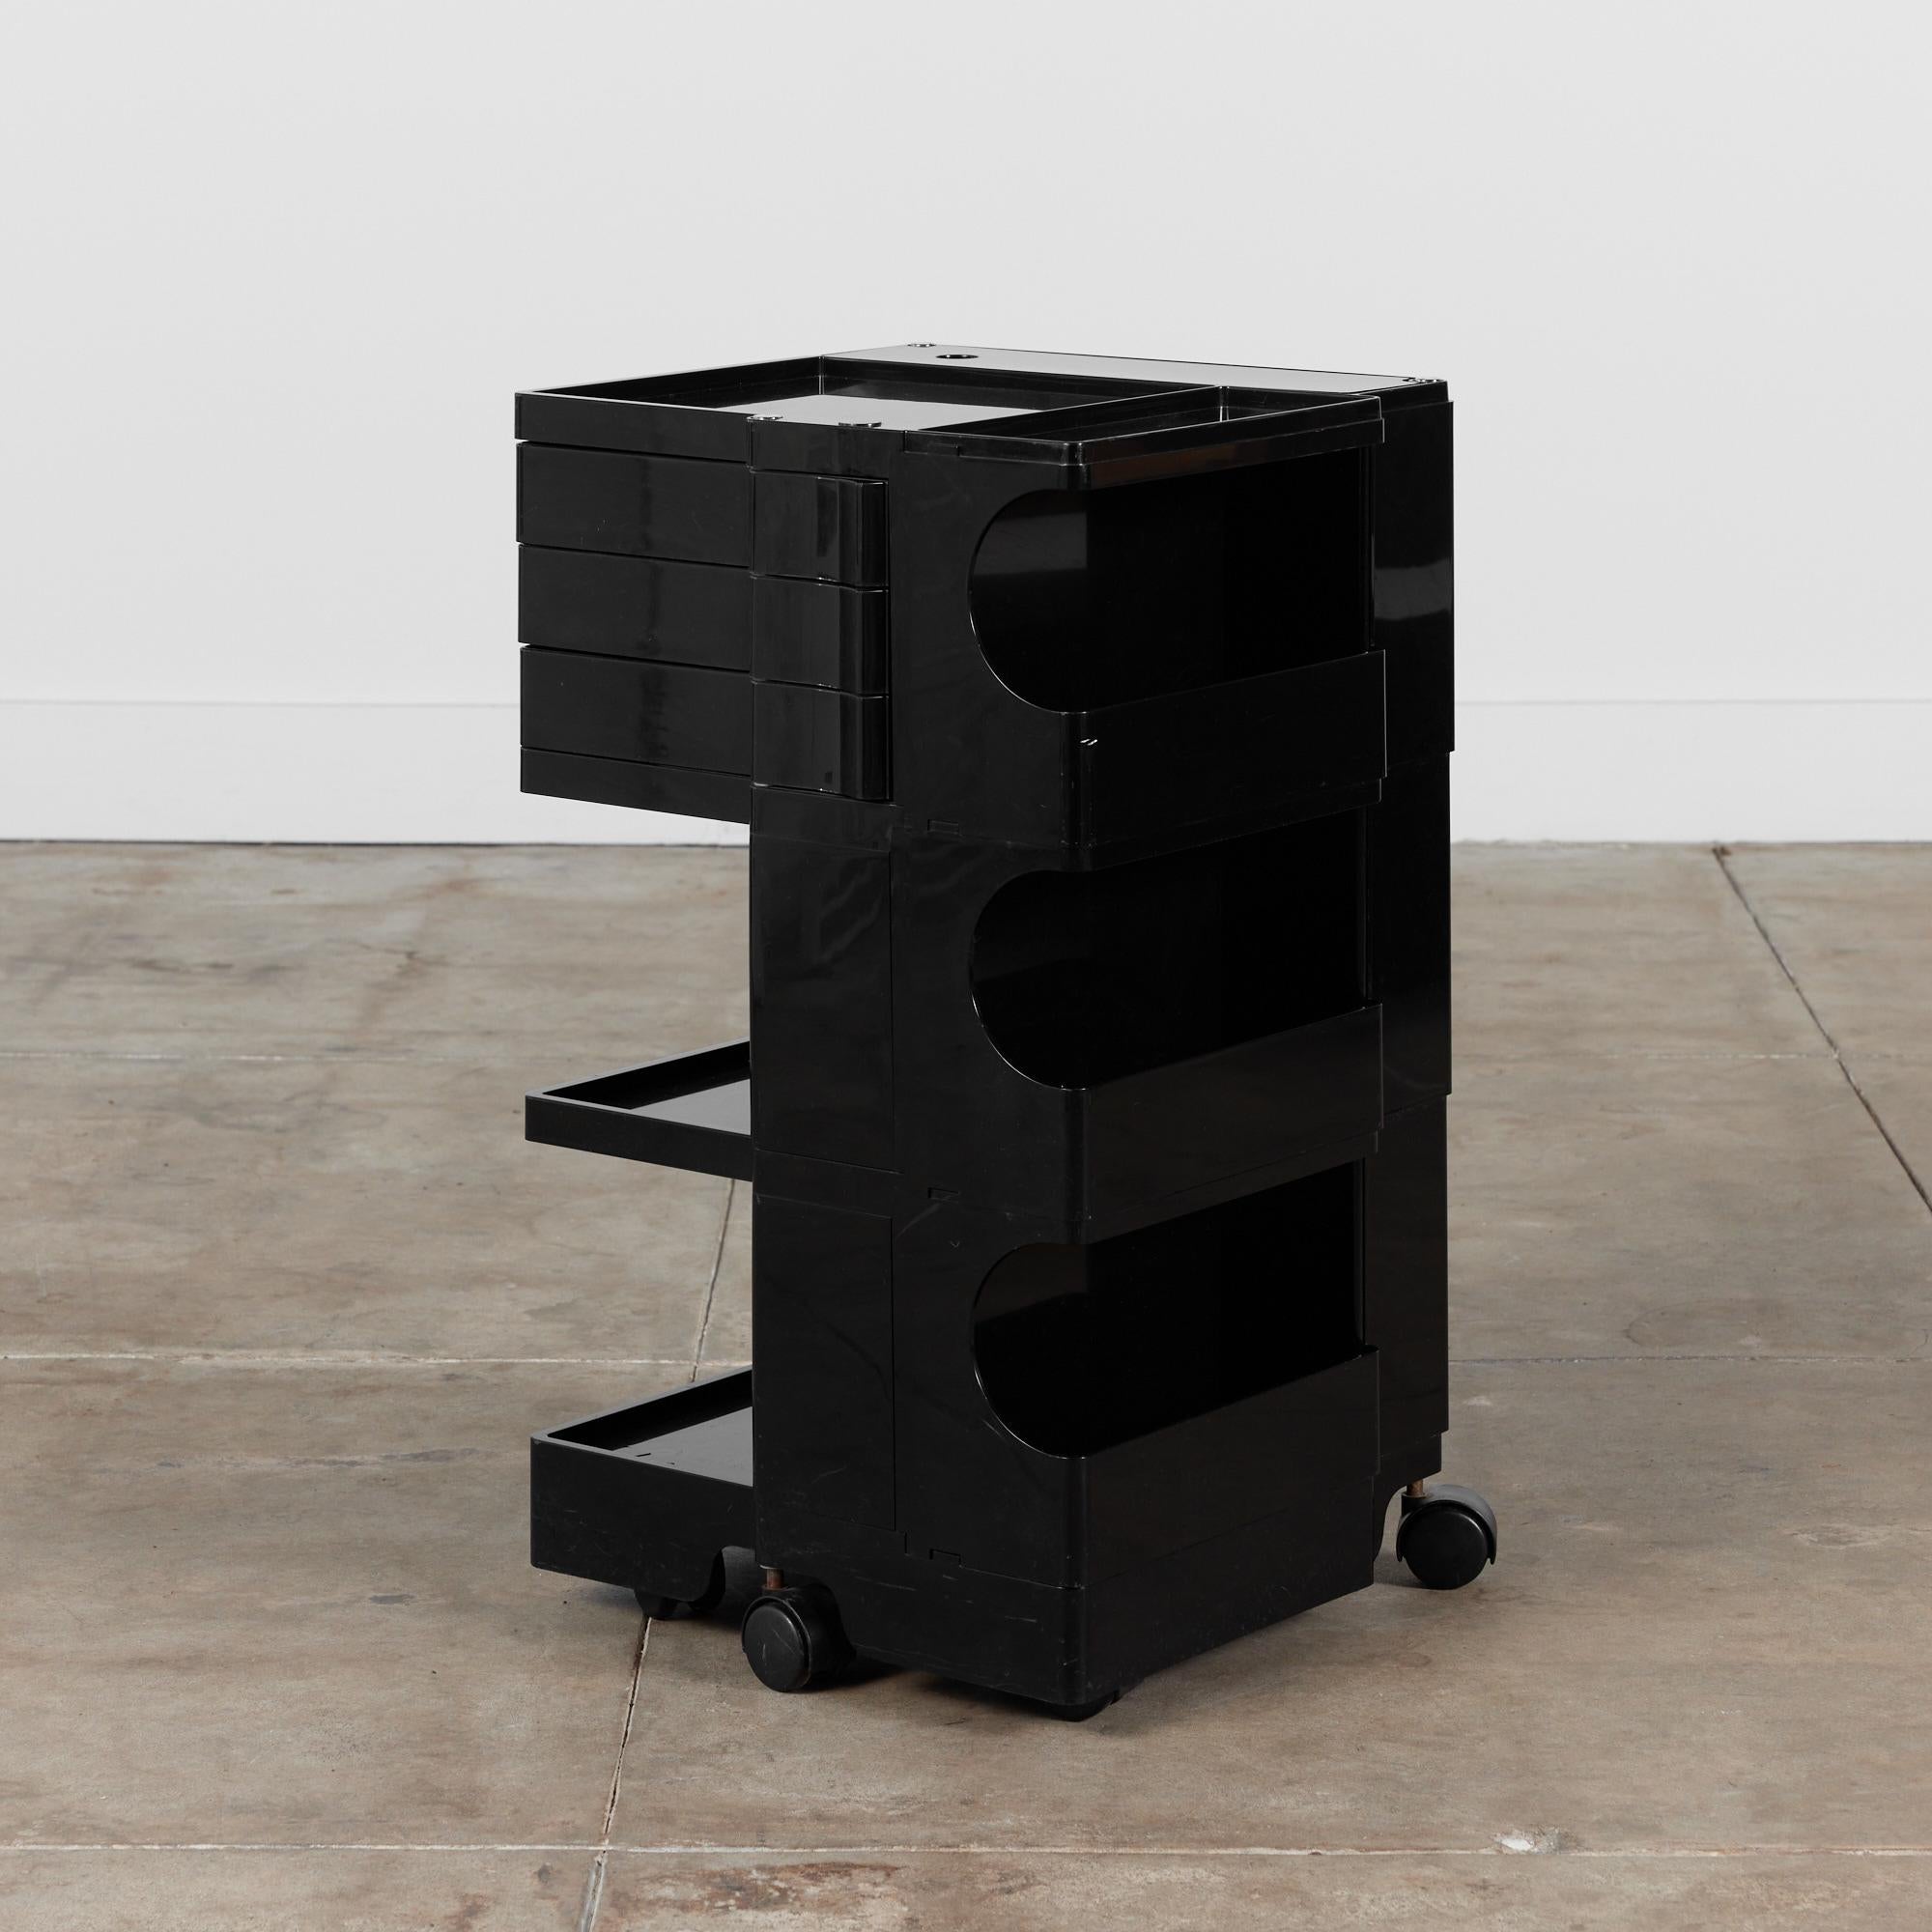 Trolley cart by Joe Colombo c.1970s, Italy. This unique plastic cart has three shallow swivel drawers and two shelves. The opposite side of the cart has three open drawers for storage. The top of this piece is divided into two shallow sections, one